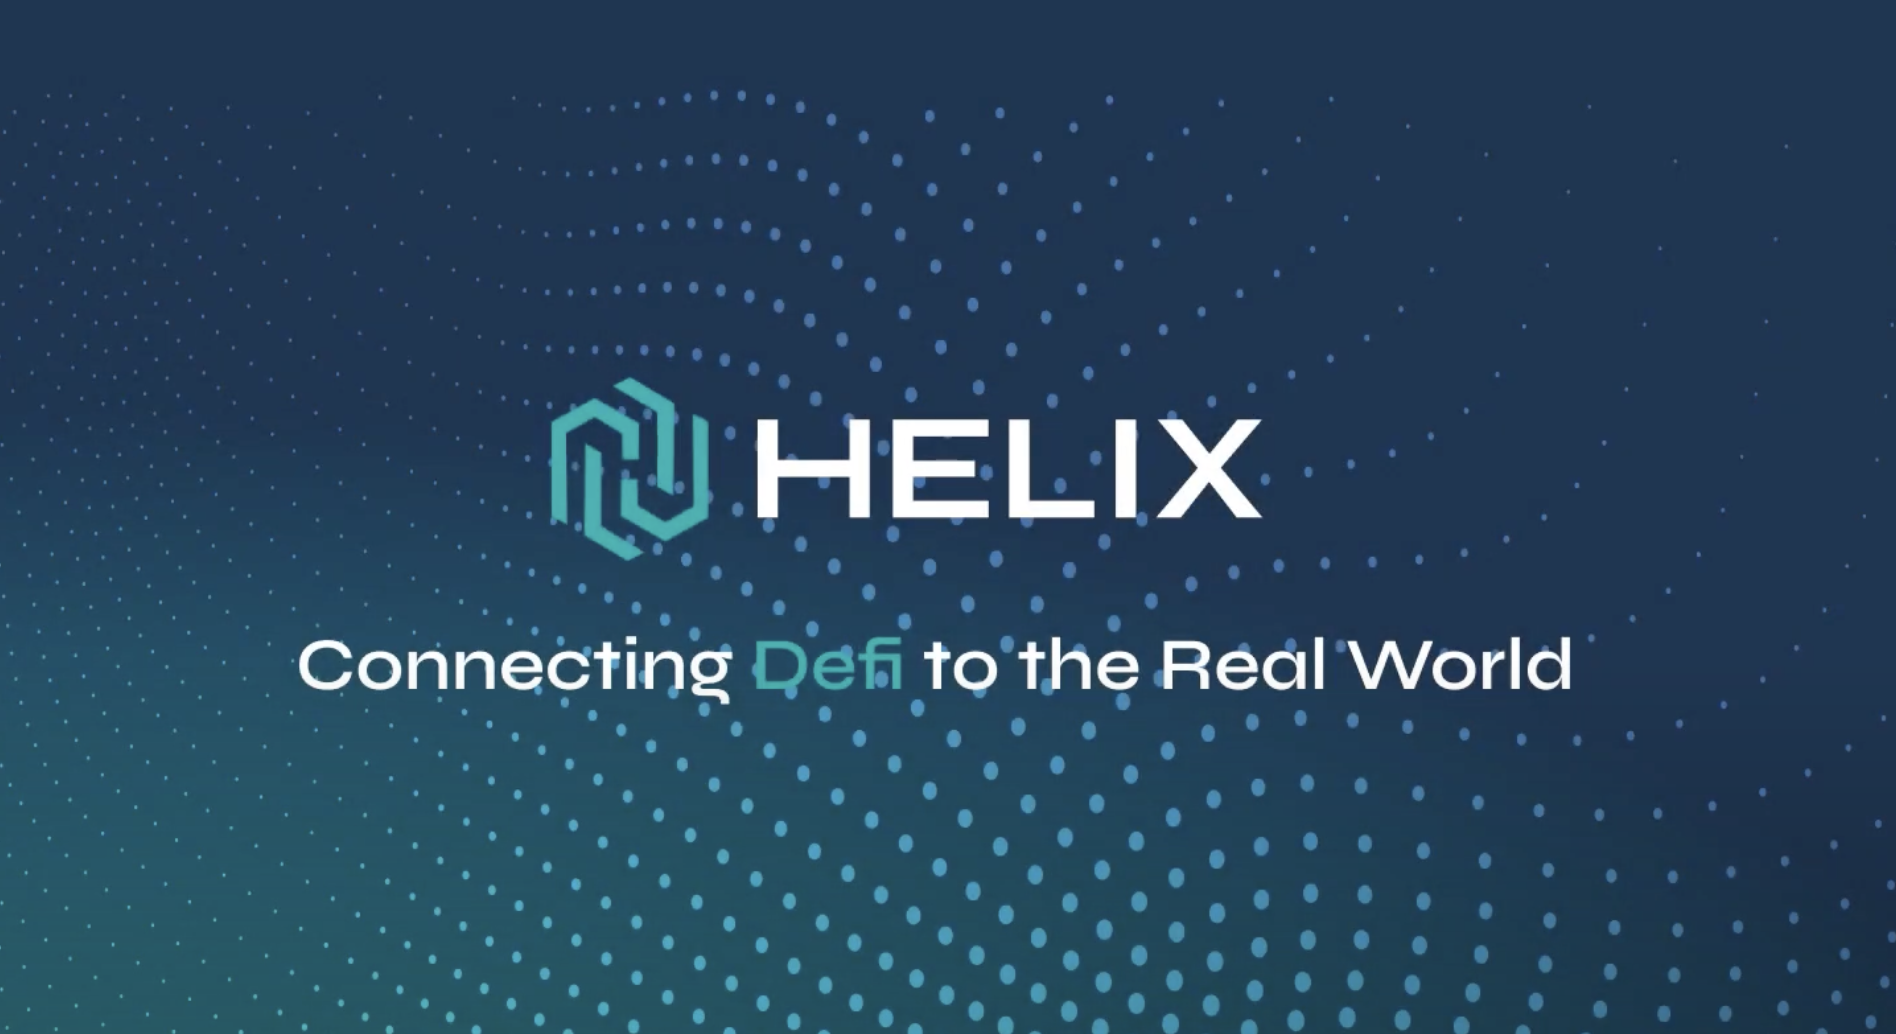 Investing in HELIX, an institutional RWA protocol to connect crypto investors with private credit yields